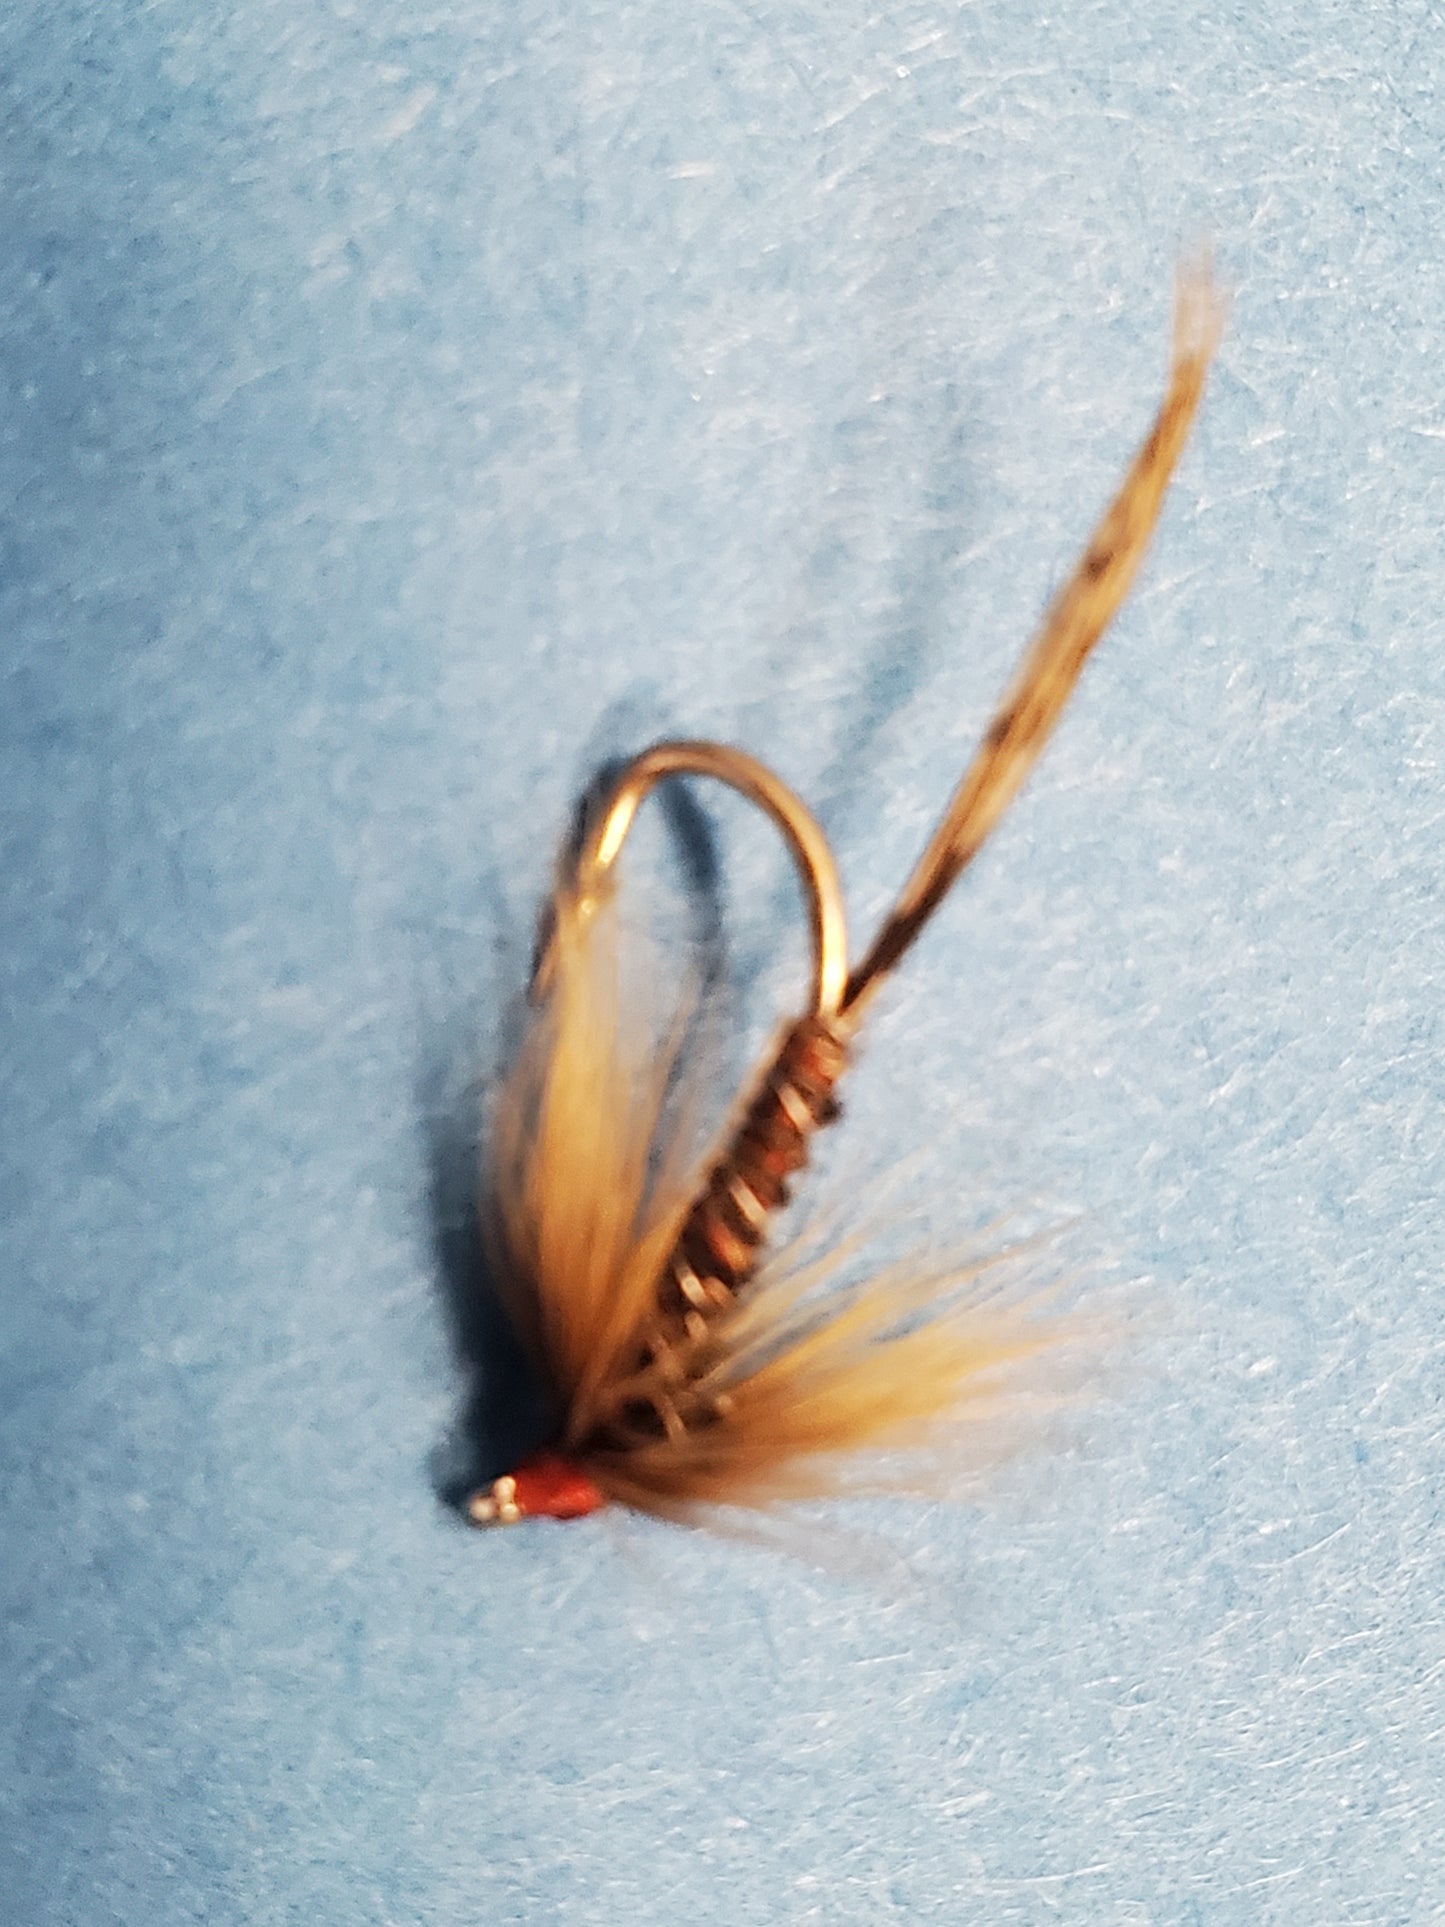 Pheasant Tail Soft Hackle Fly, Soft Hackle Wet Fly